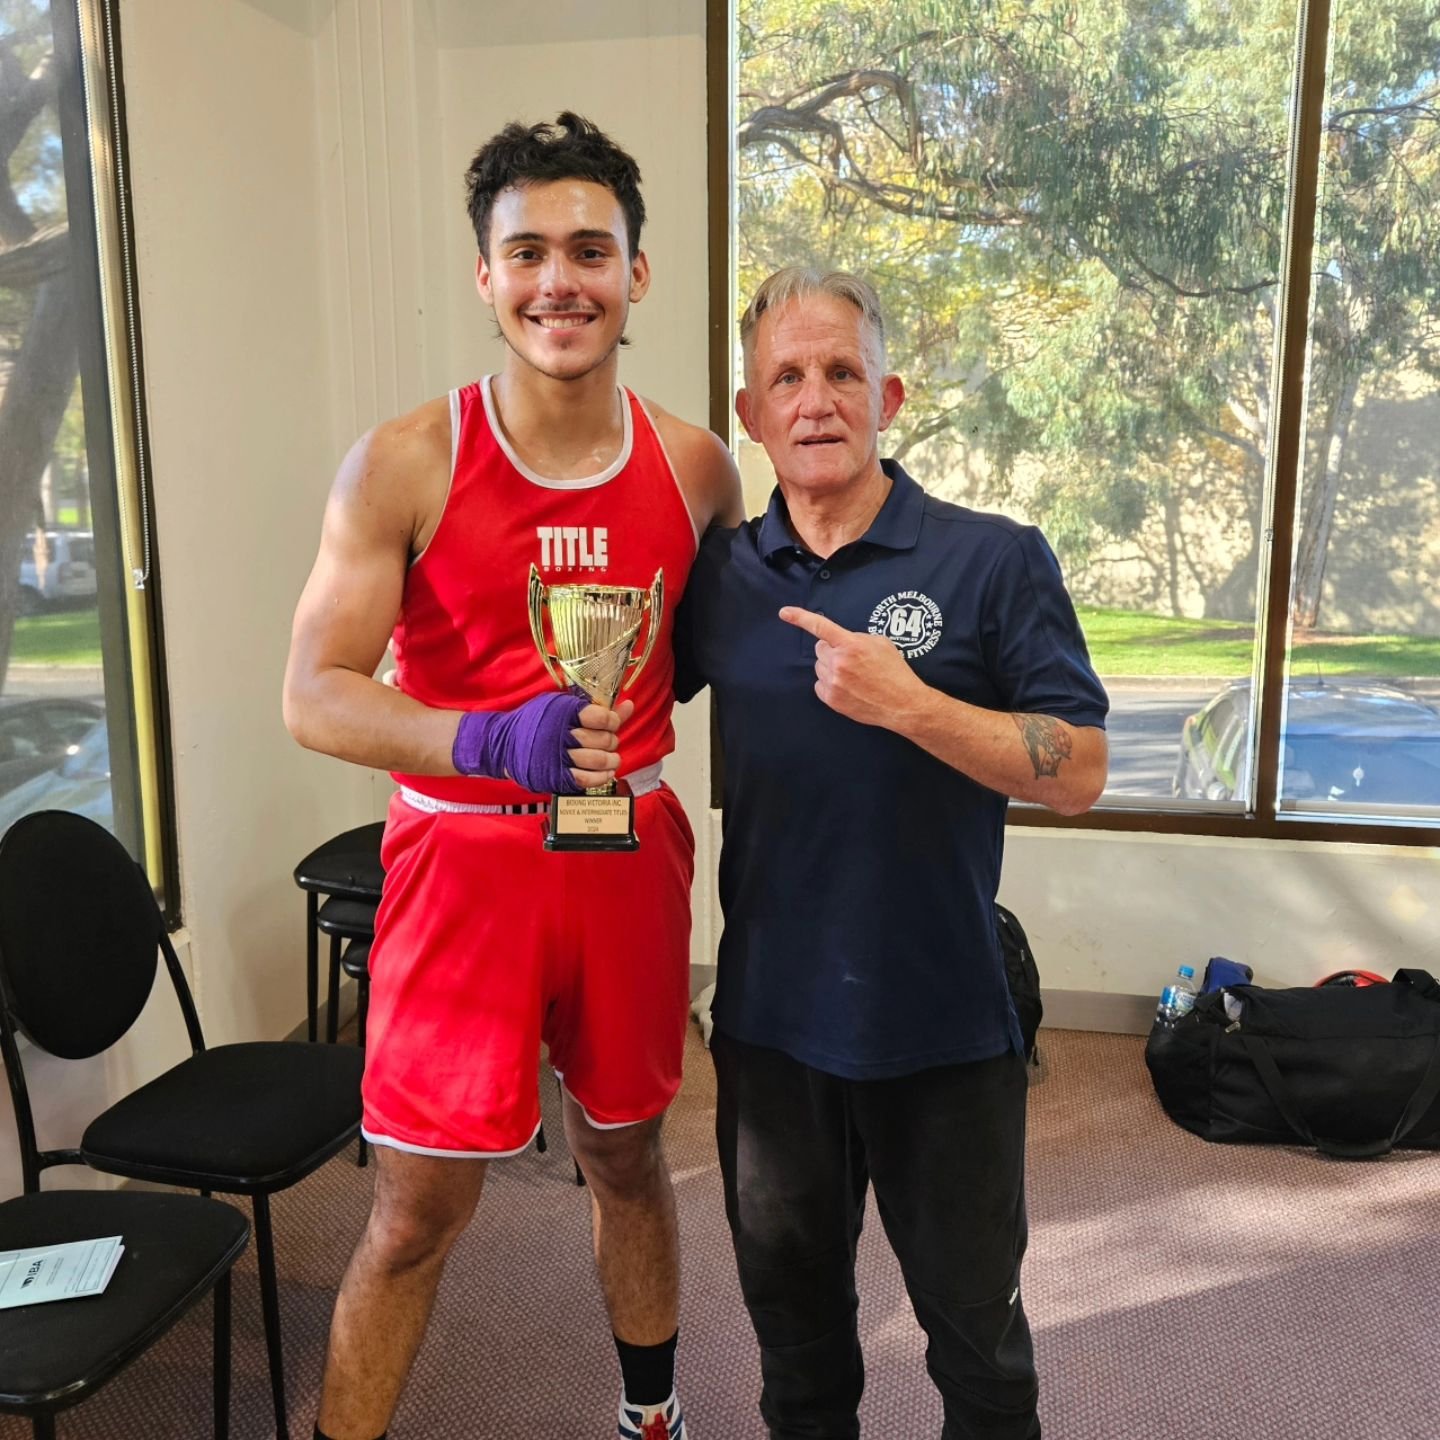 A successful day at the @boxing_victoria U19 State Championships today with @jalabejorge winning the State Novice Title.

Thank you to those who came along and gave him your support.

@northmelbourneboxing #boxing #teamnmbf ##boxingvictoria 🥊